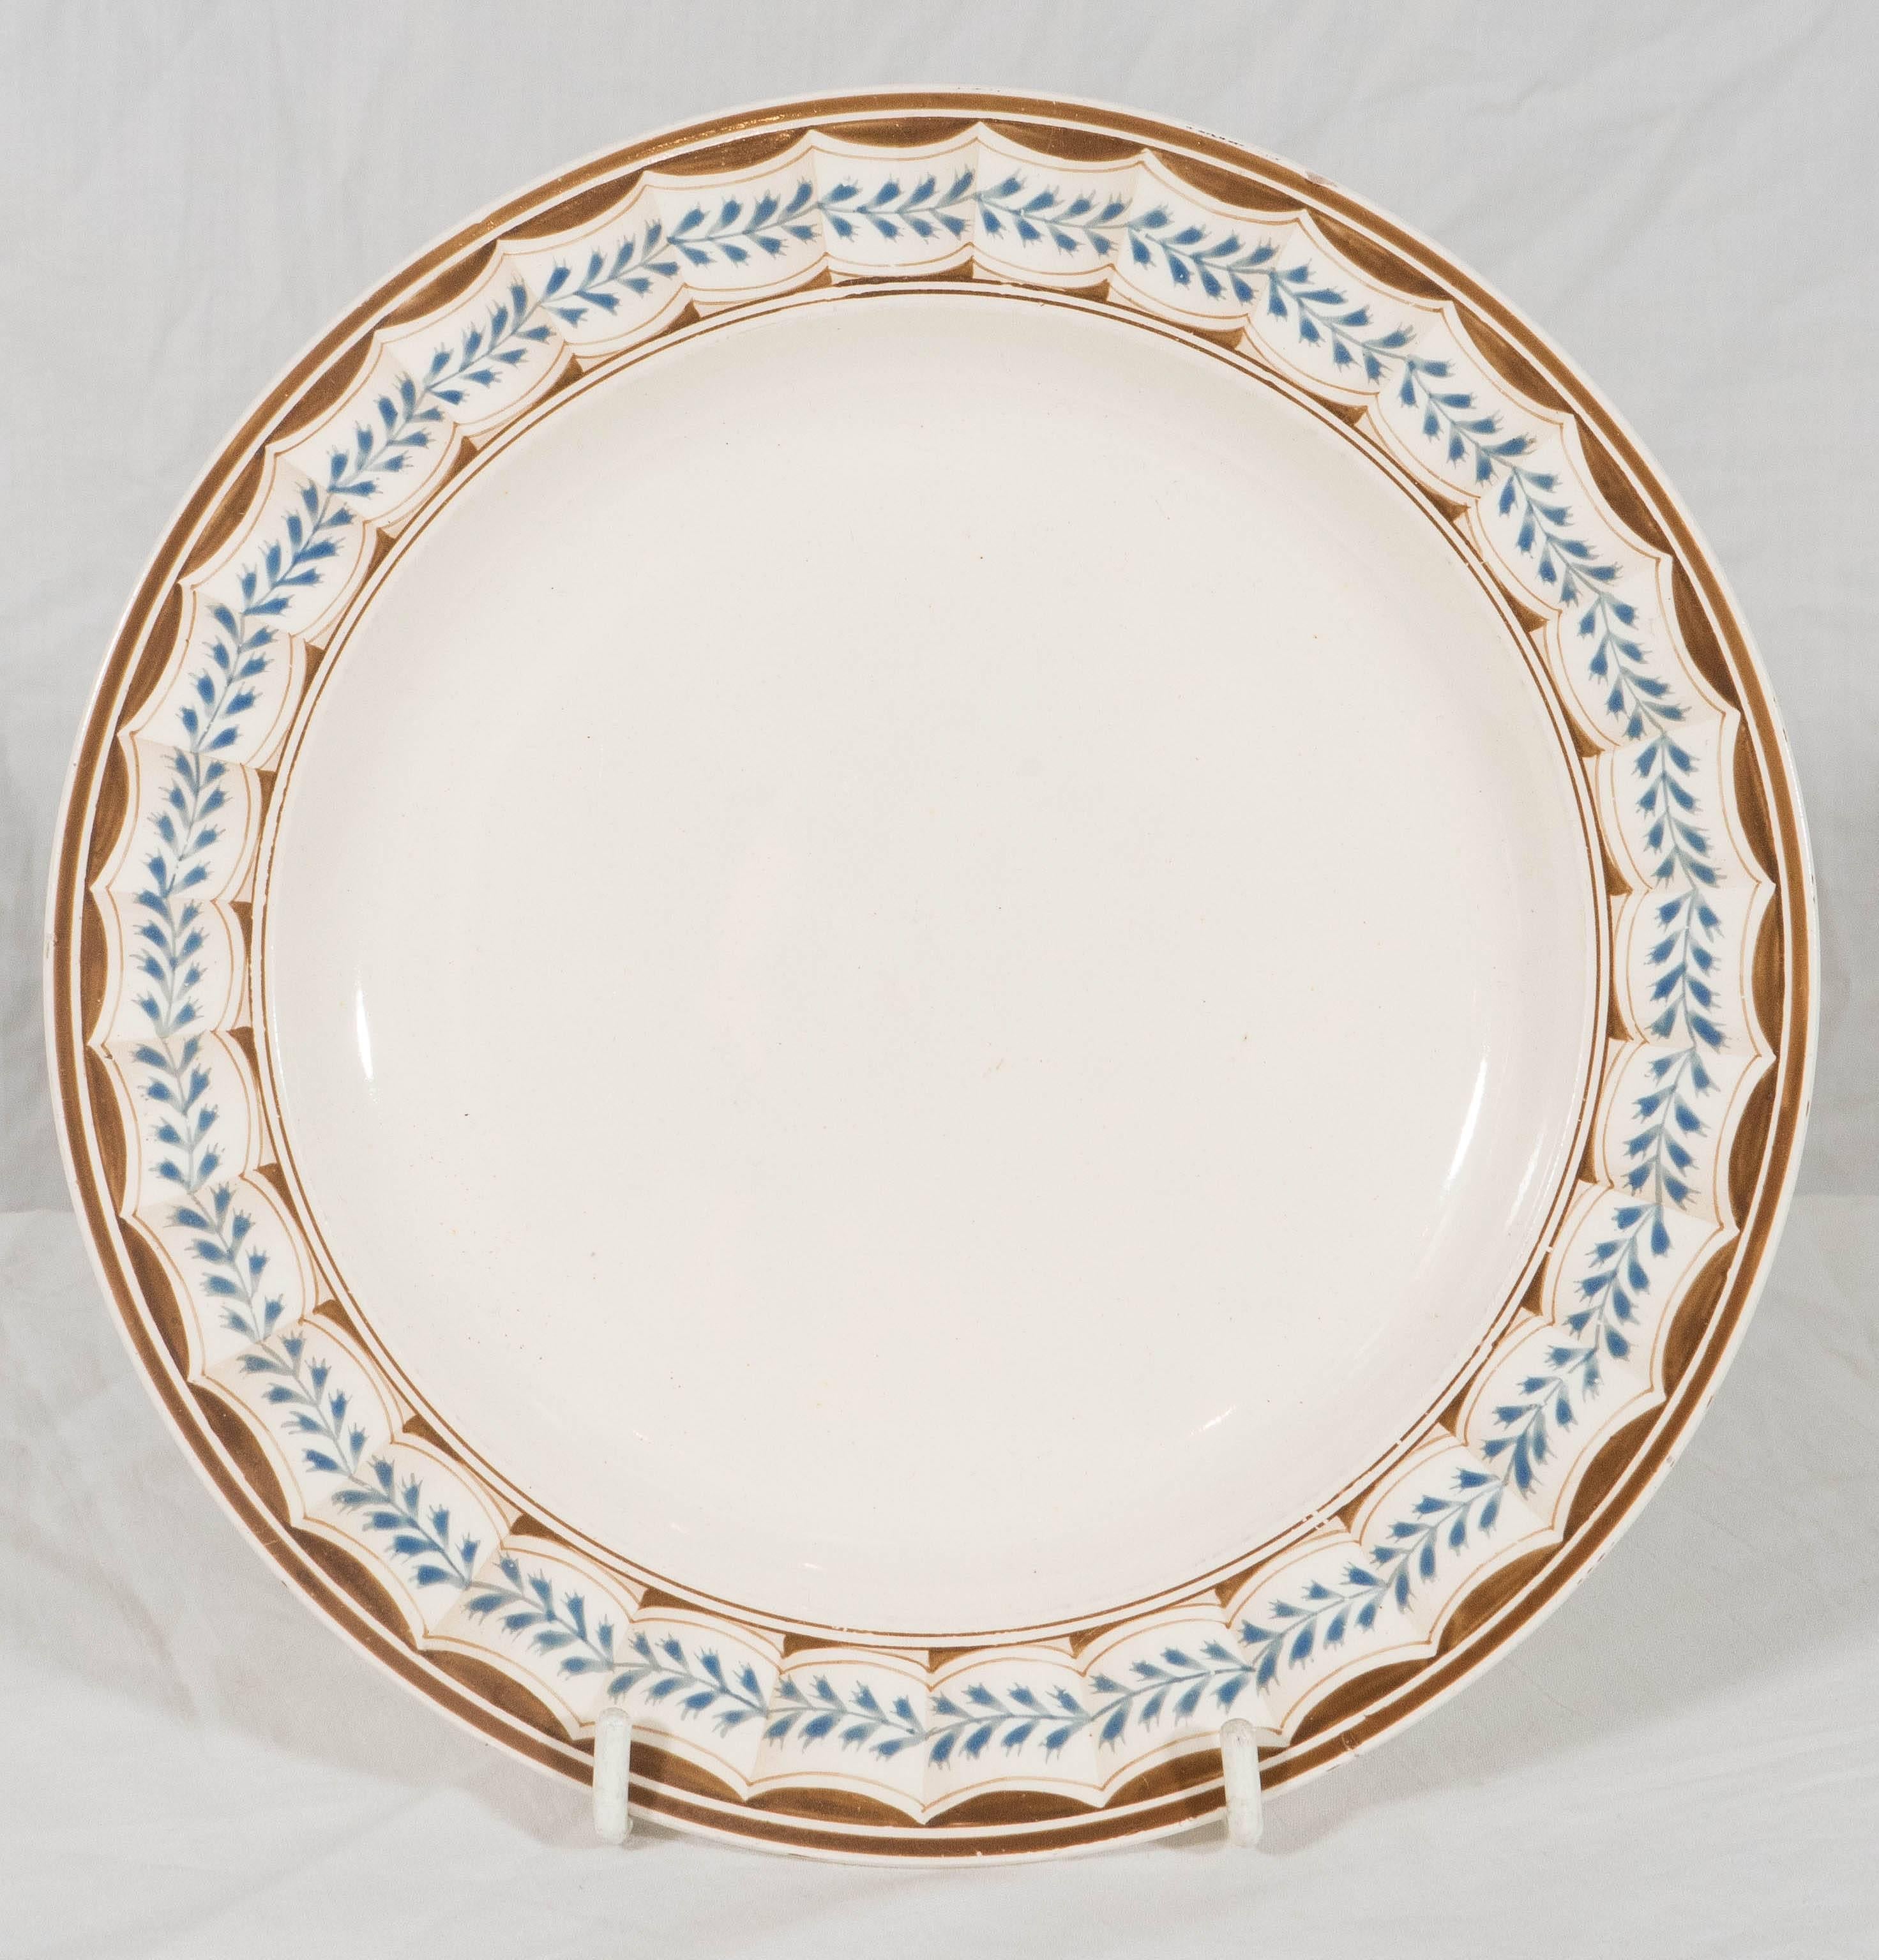 Earthenware Four Wedgwood Creamware Dishes in the Lag and Feather Pattern